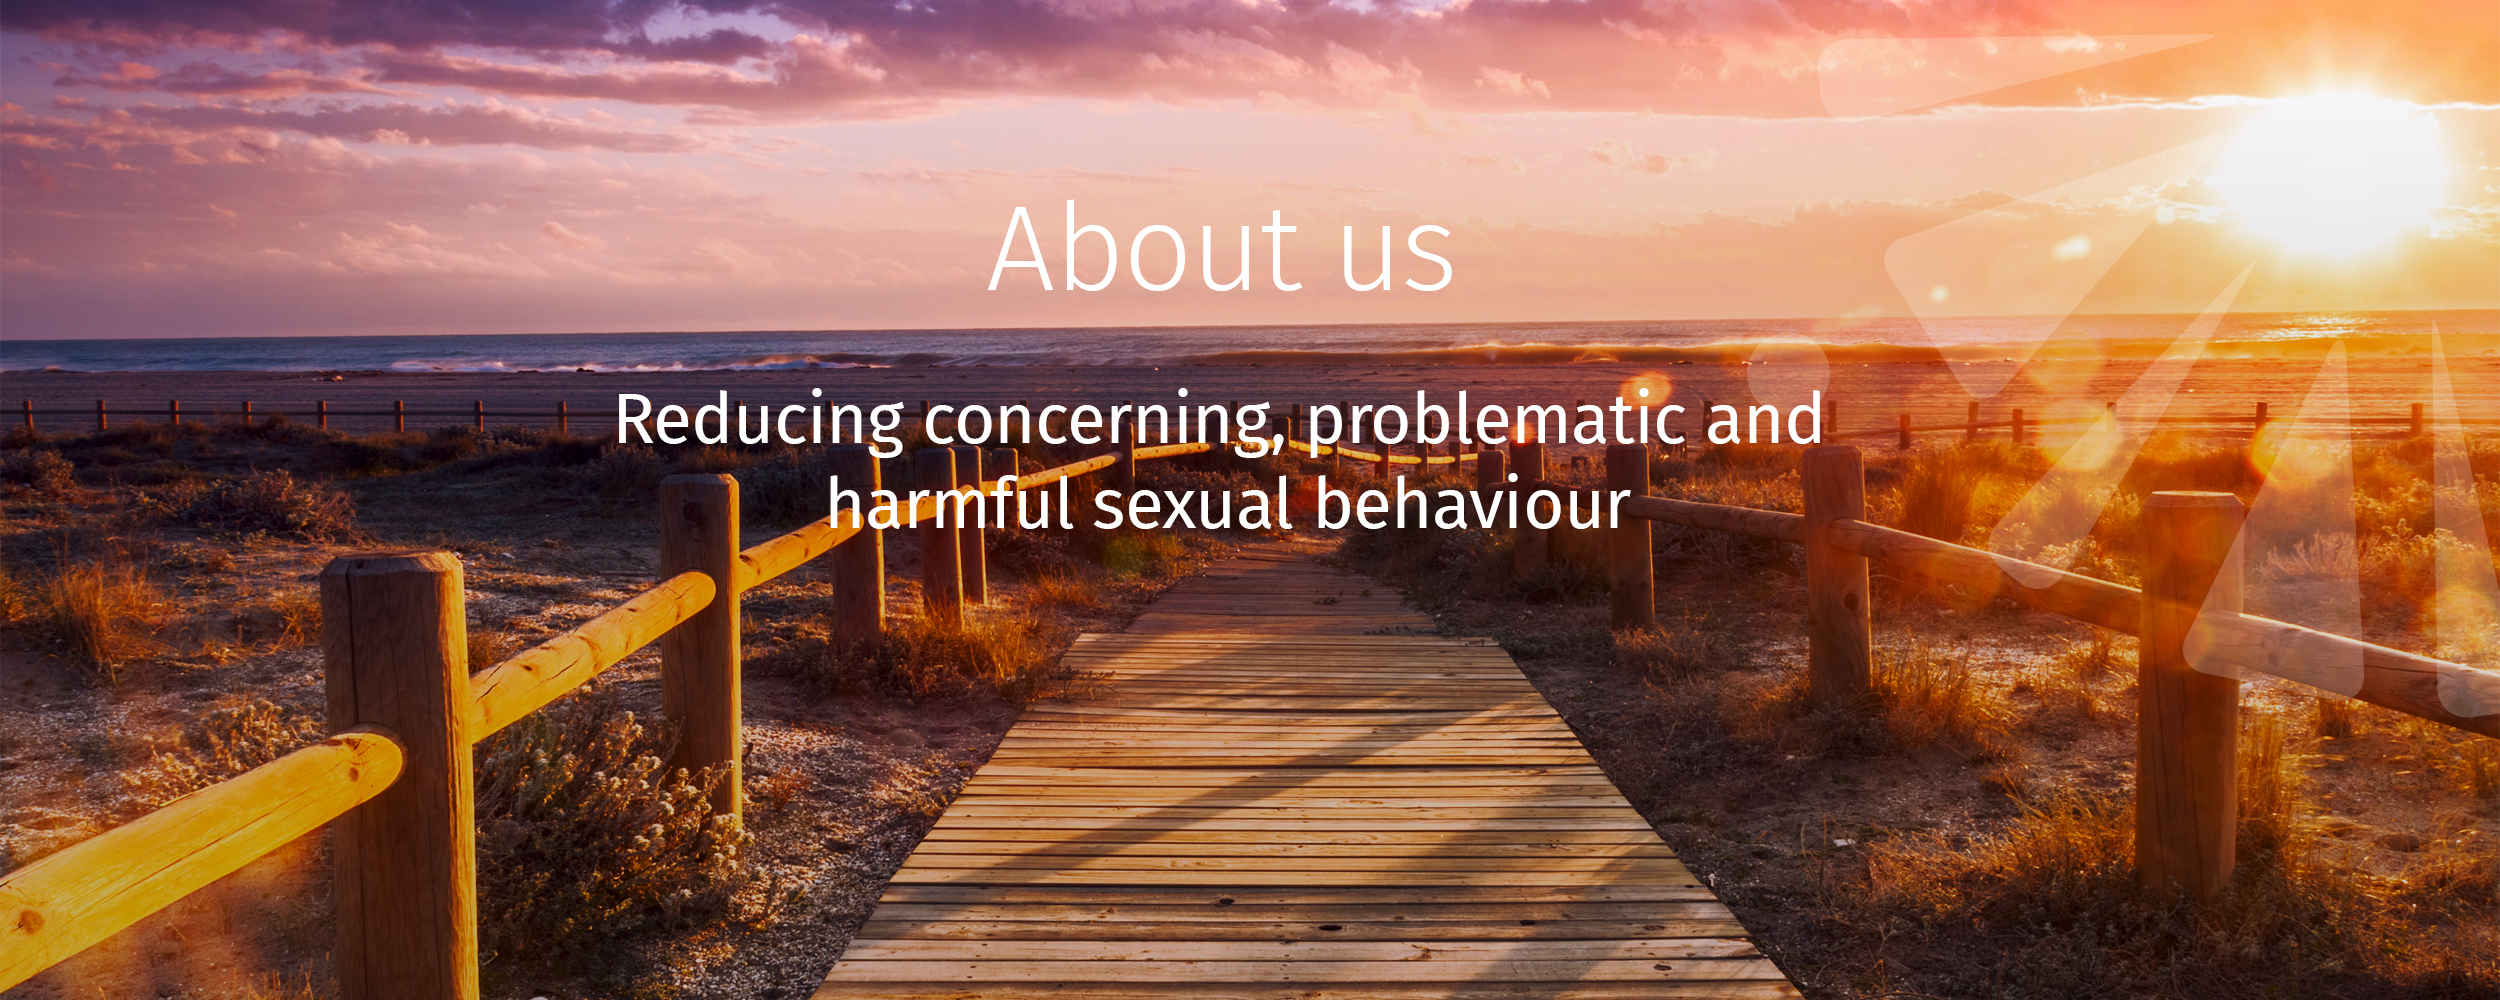 Reducing concerning, problematic and harmful sexual behaviour